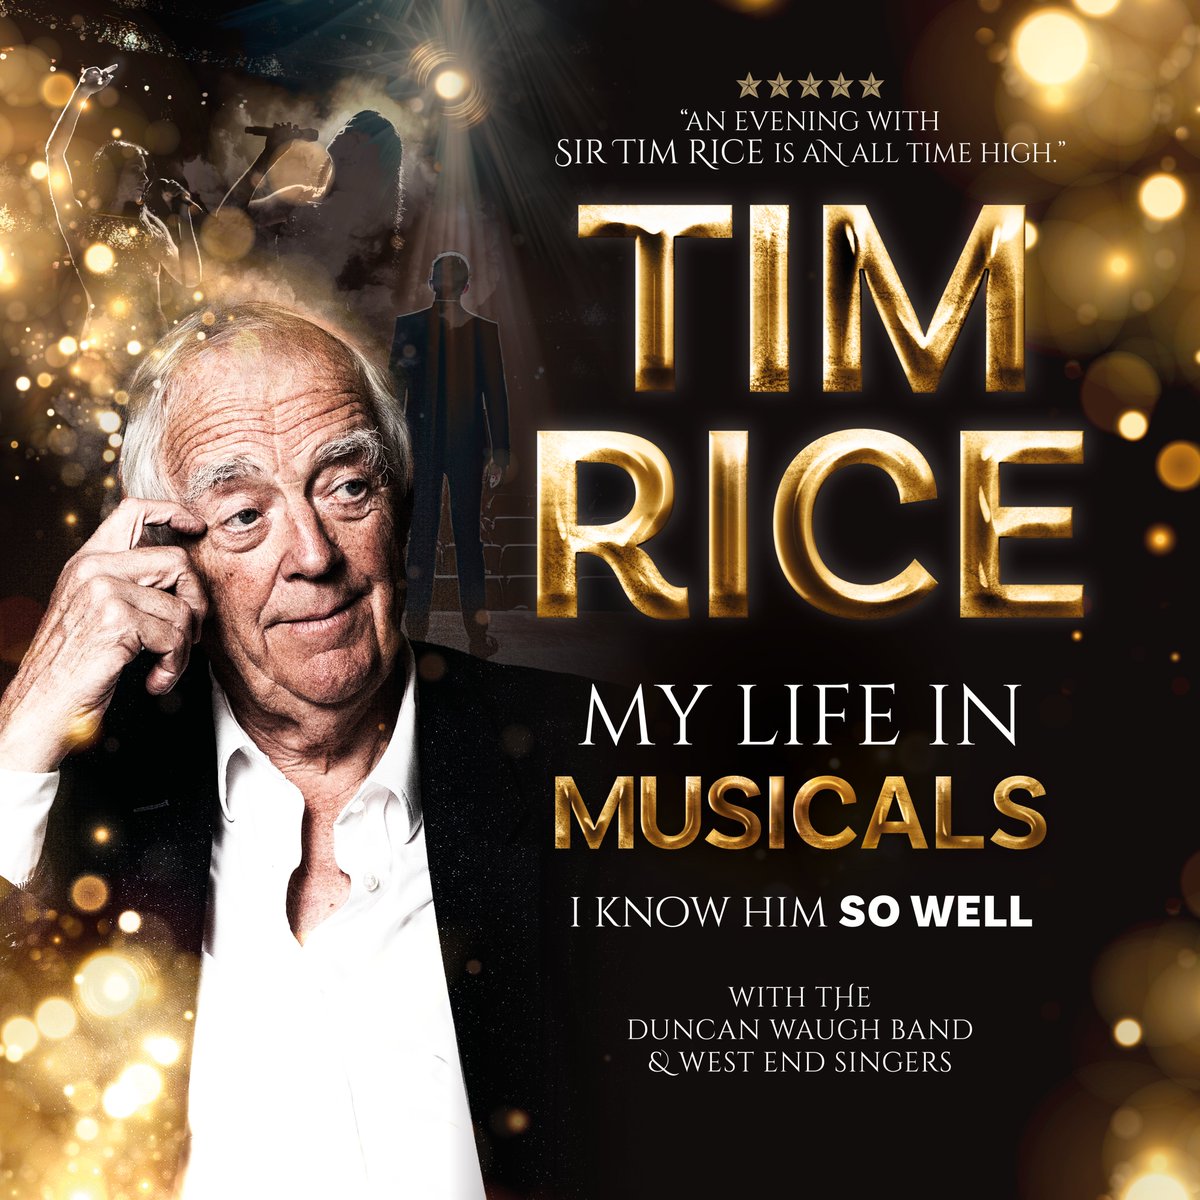 Sir Tim Rice, who is coming @camartstheatre this April, spoke to BBC Radio Cambridgeshire today about his show and his career. Listen again over at BBC Sounds! (Skip to 13.47 onwards) bbc.co.uk/sounds/play/li…